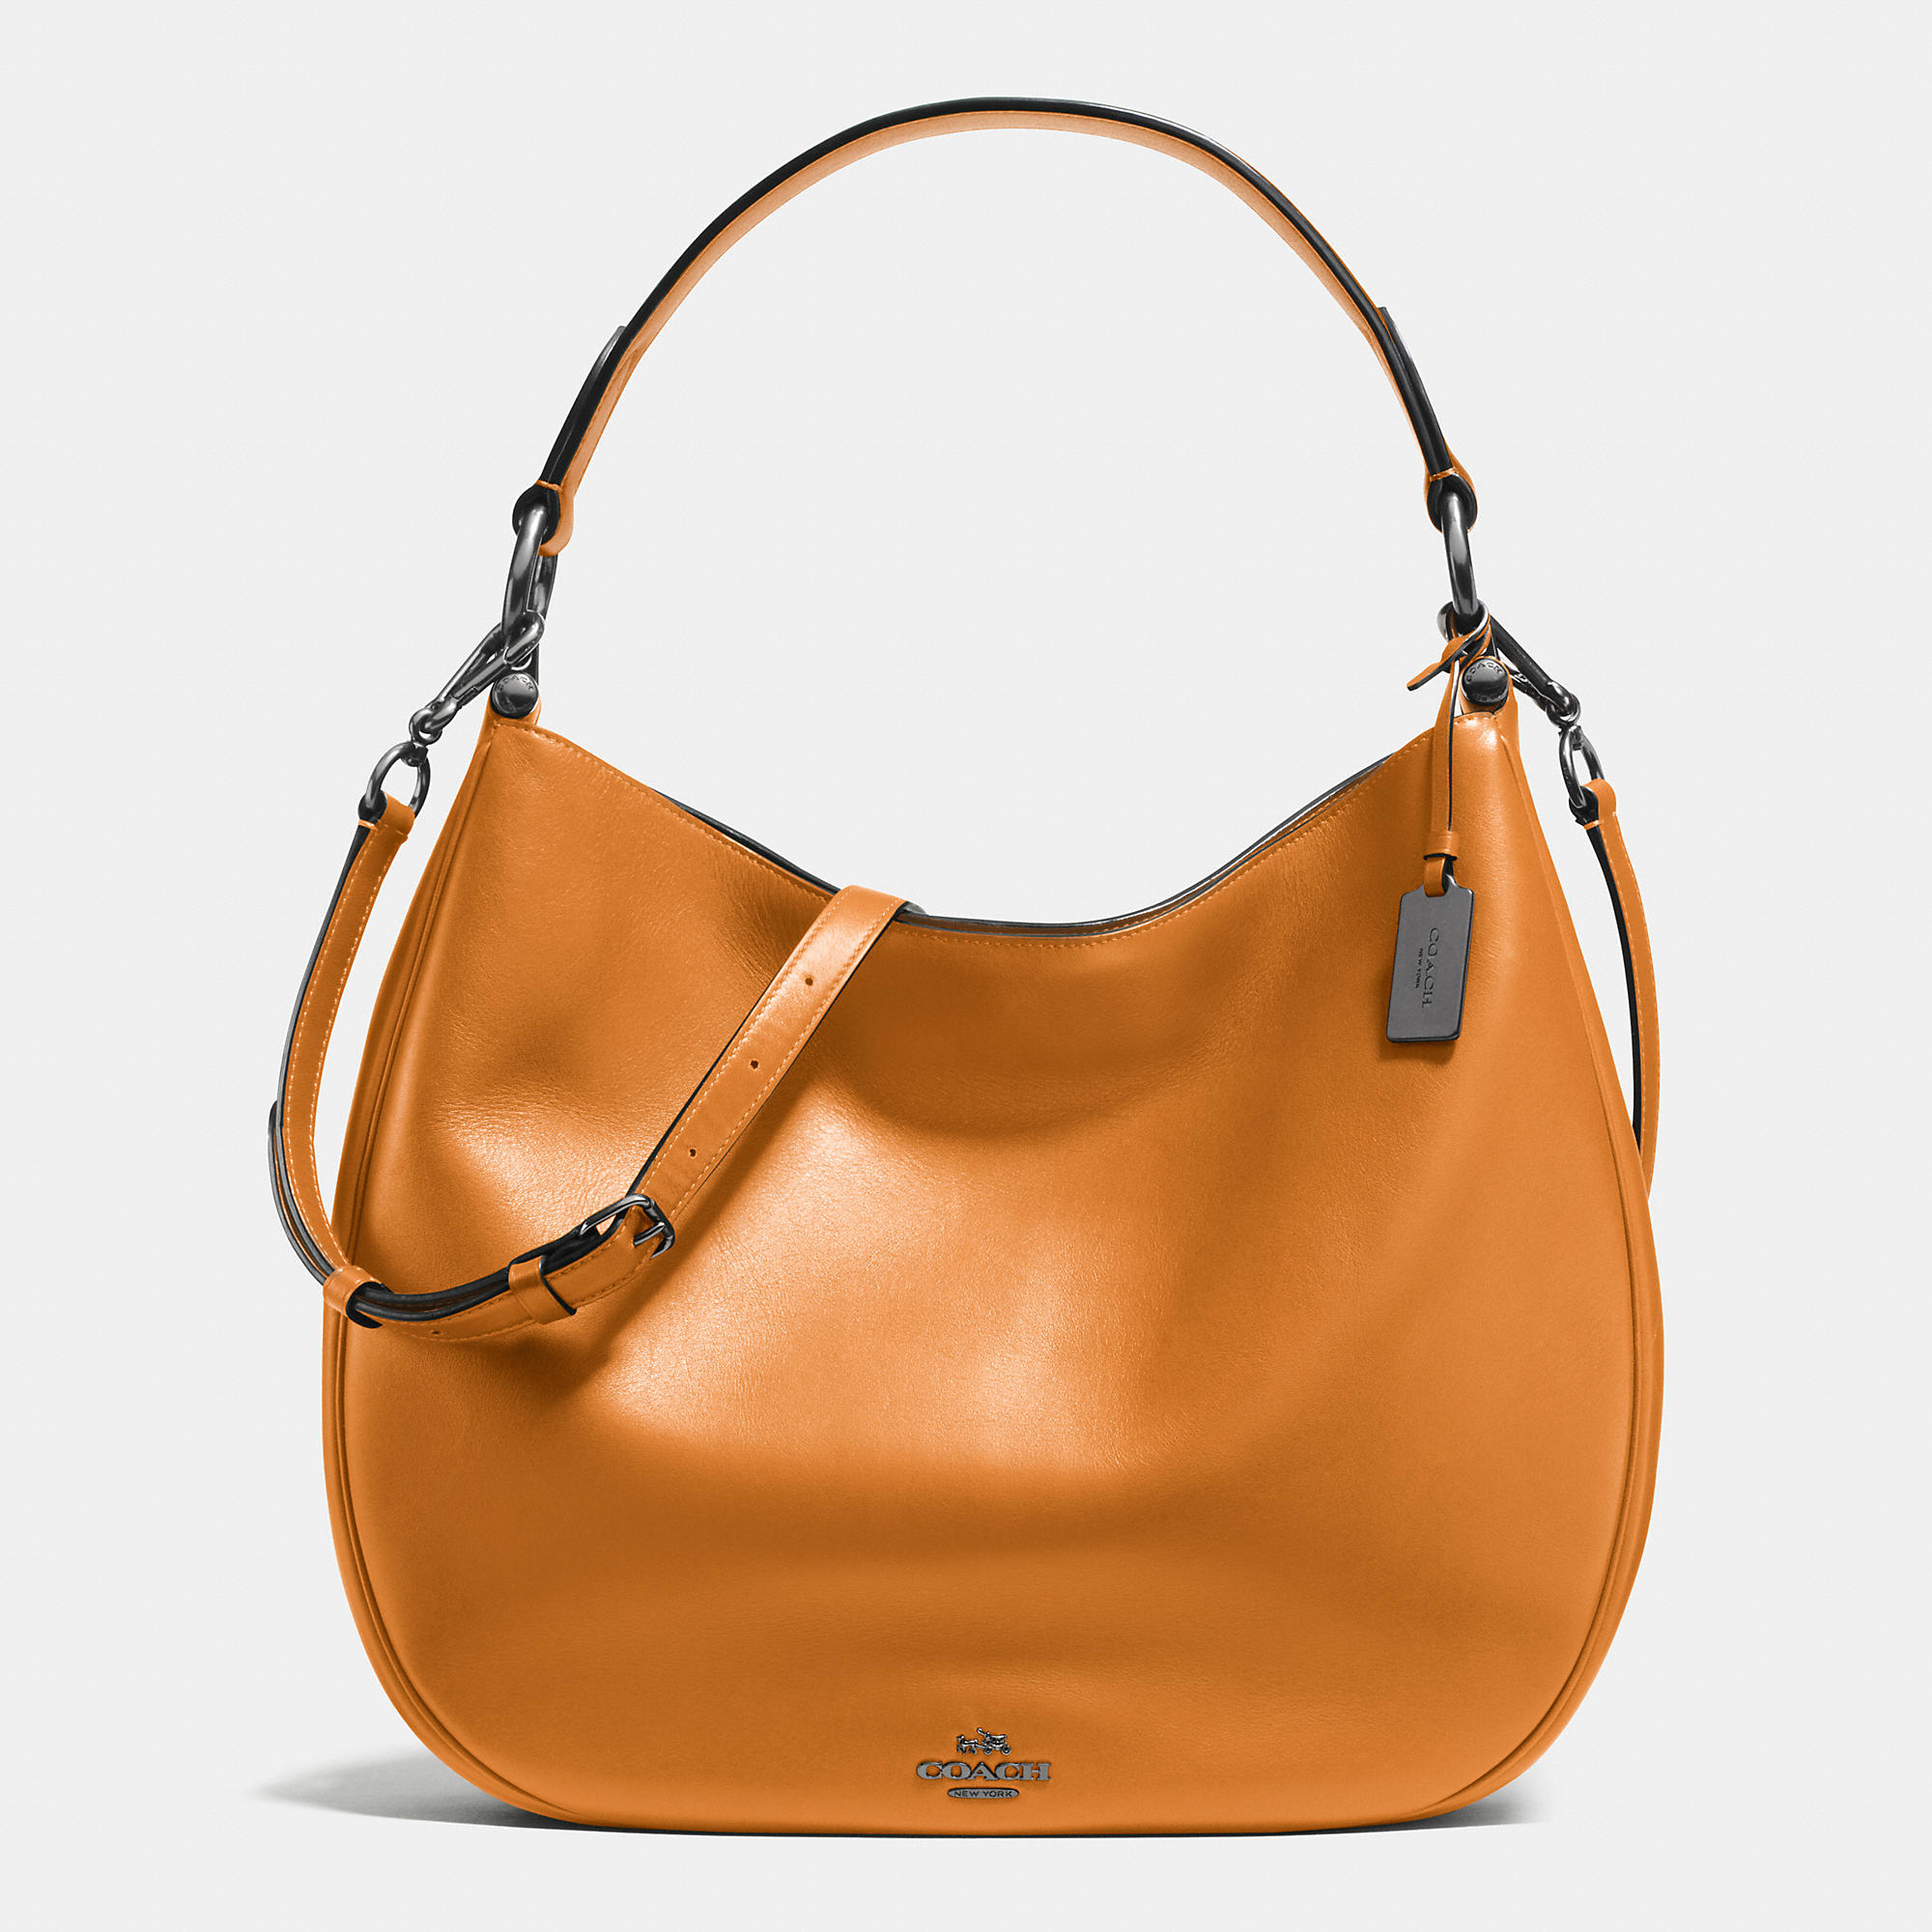 Lyst - Coach Nomad Leather Hobo in Natural